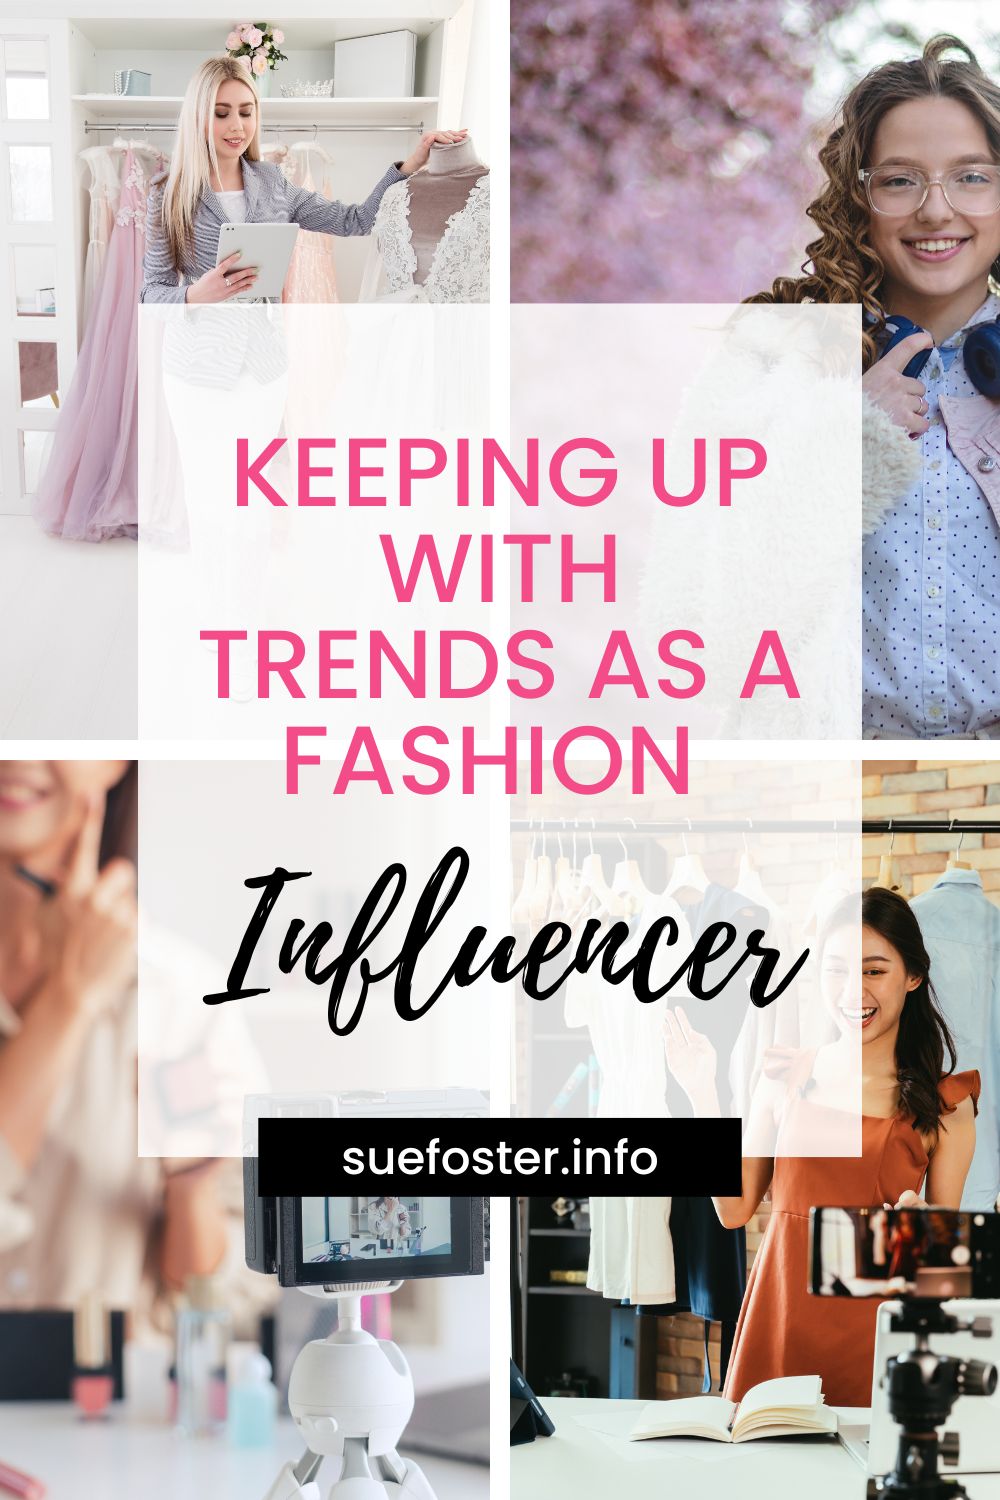 Want to become an online fashion influencer? Read these tips for staying up-to-date on the latest fashion trends and styles.